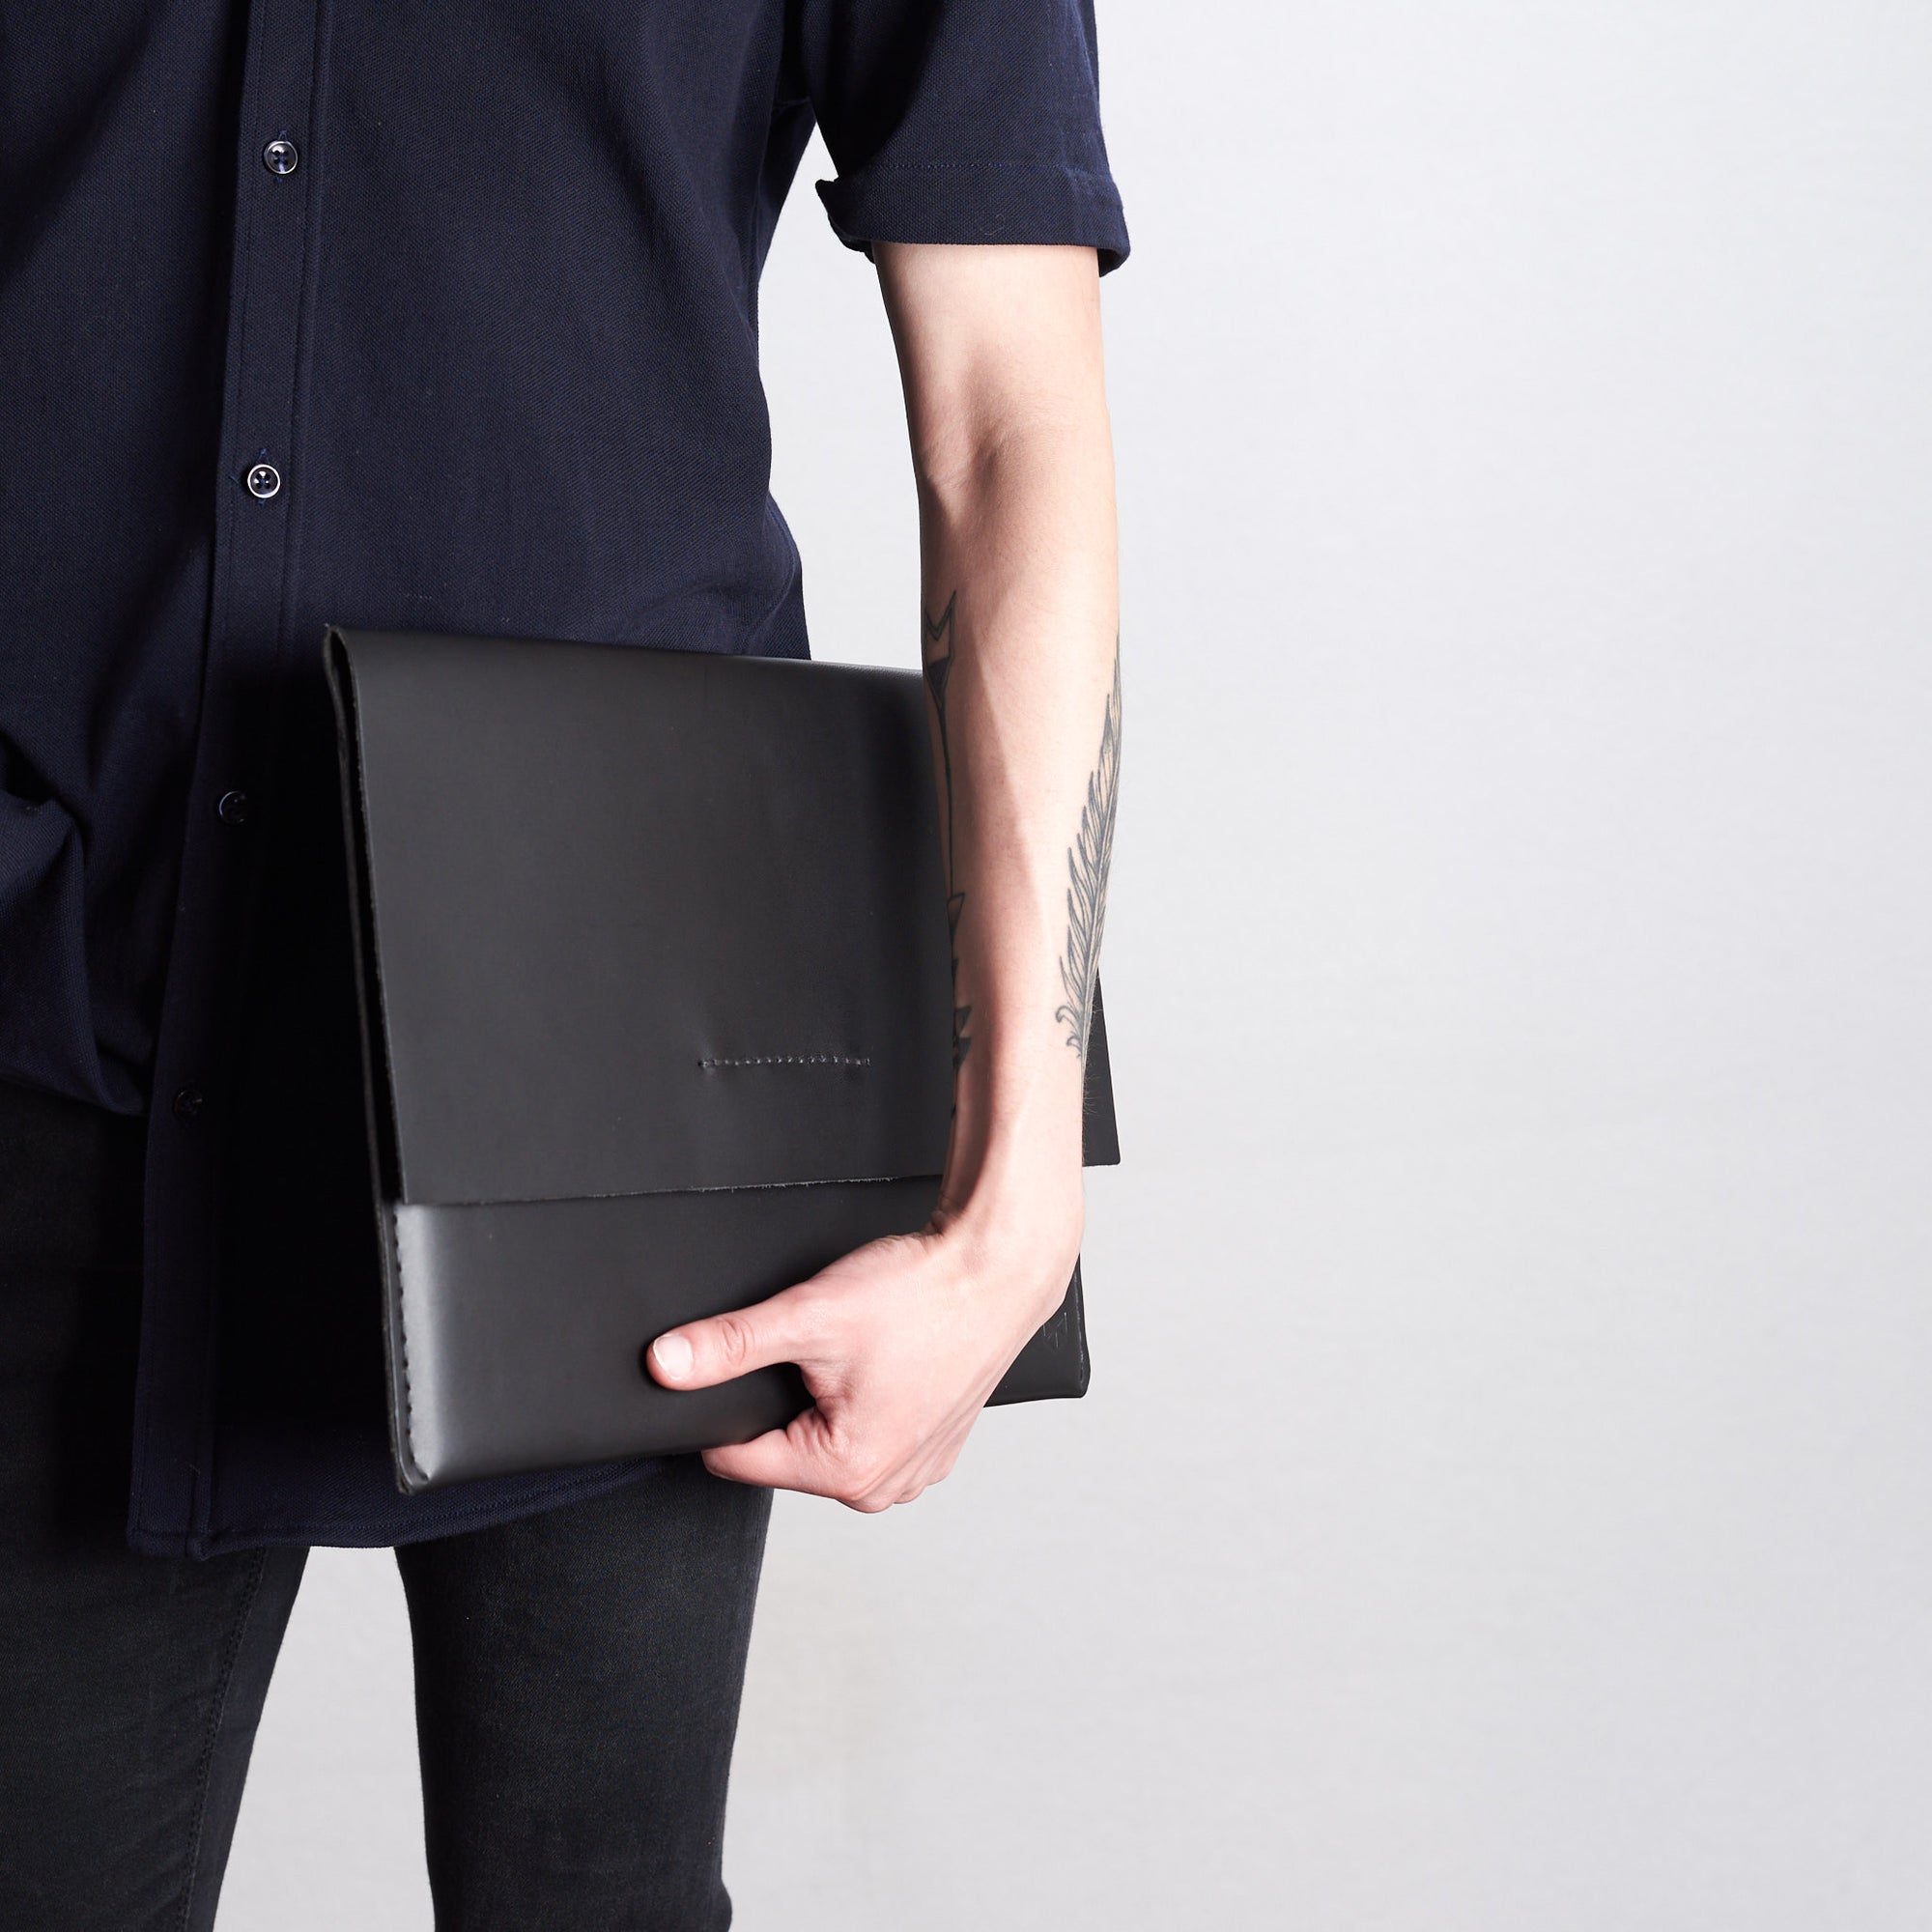 Style side view. iPad Sleeve. Leather Case Black for iPad by Capra Leather